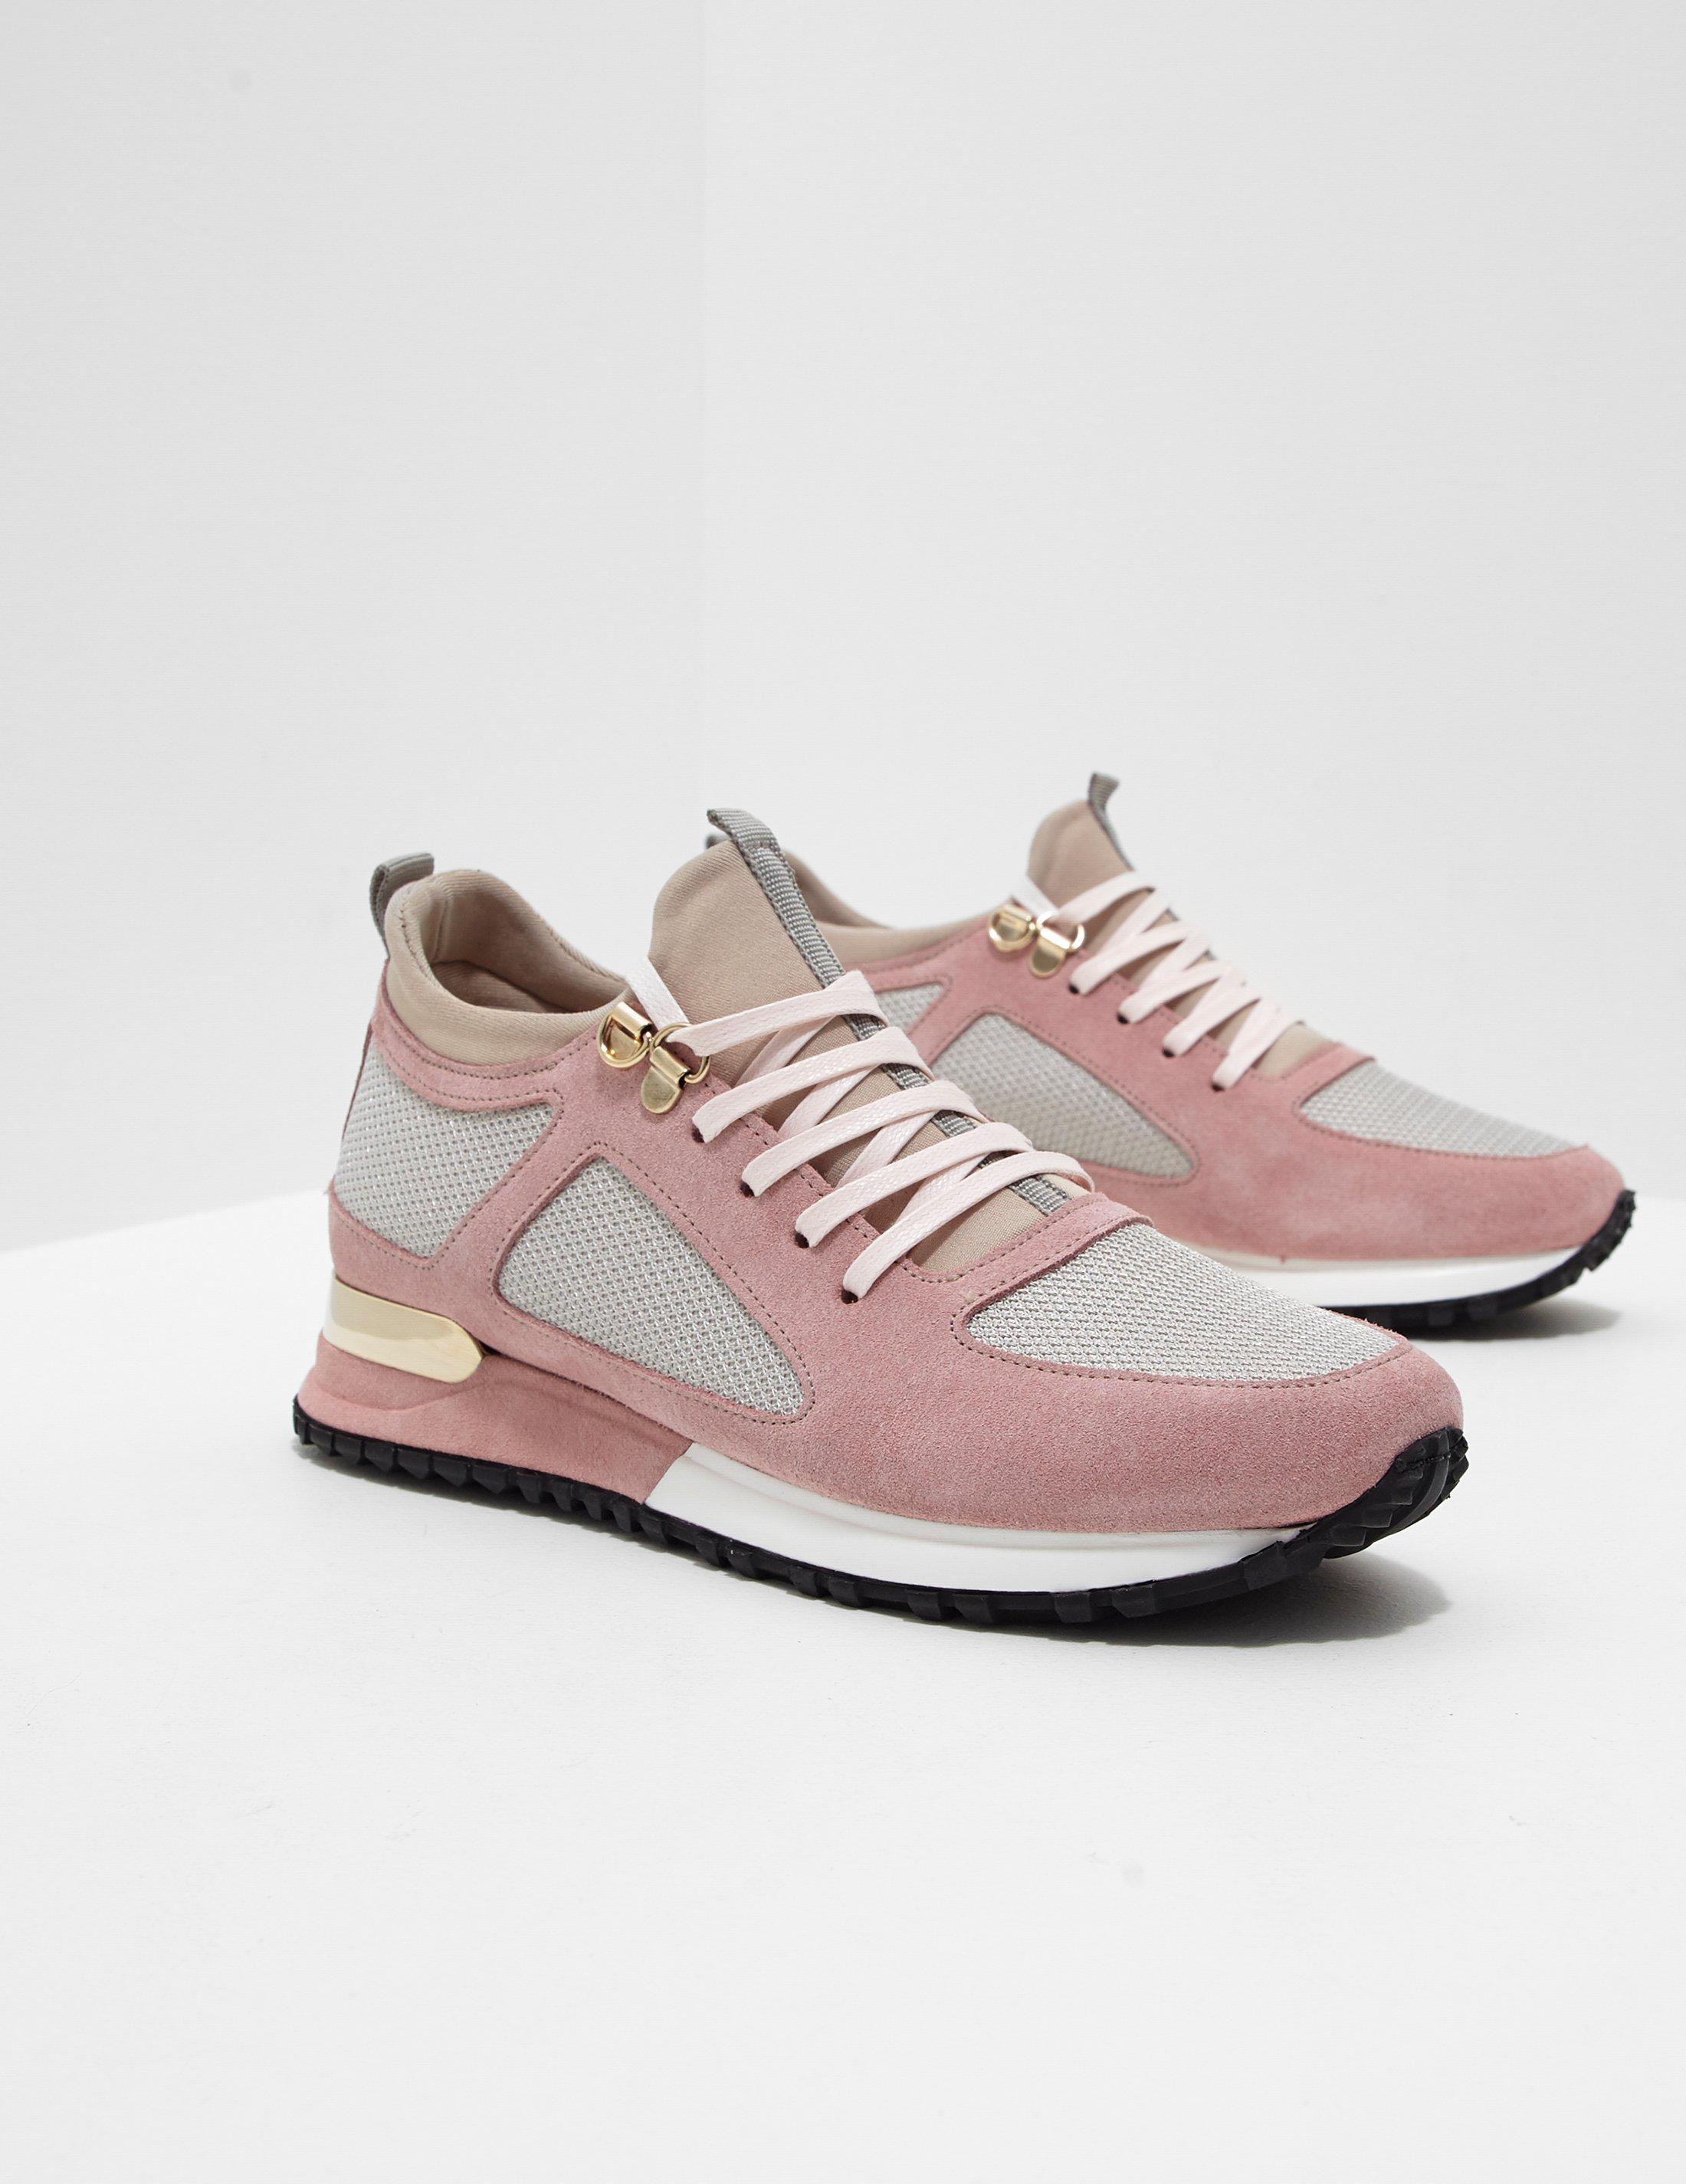 Mallet Suede Diver Low Top Trainers in 